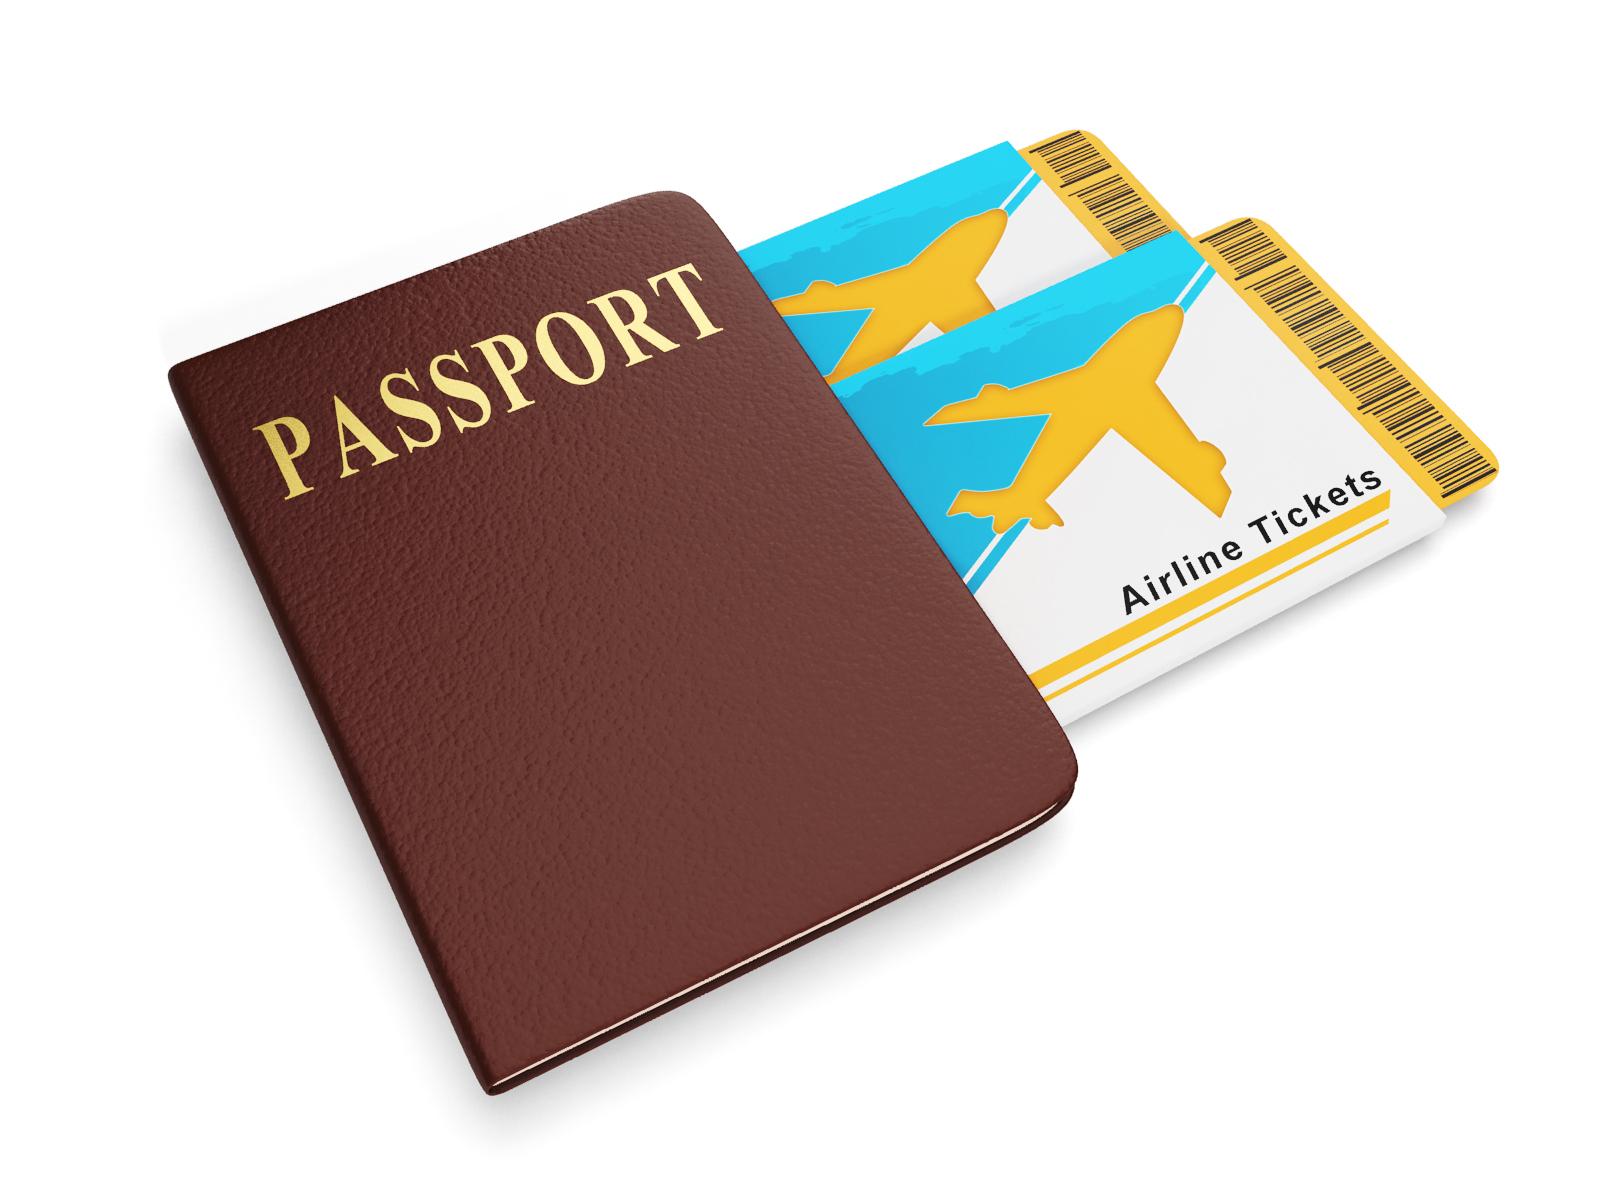 Image of passports and plane tickets